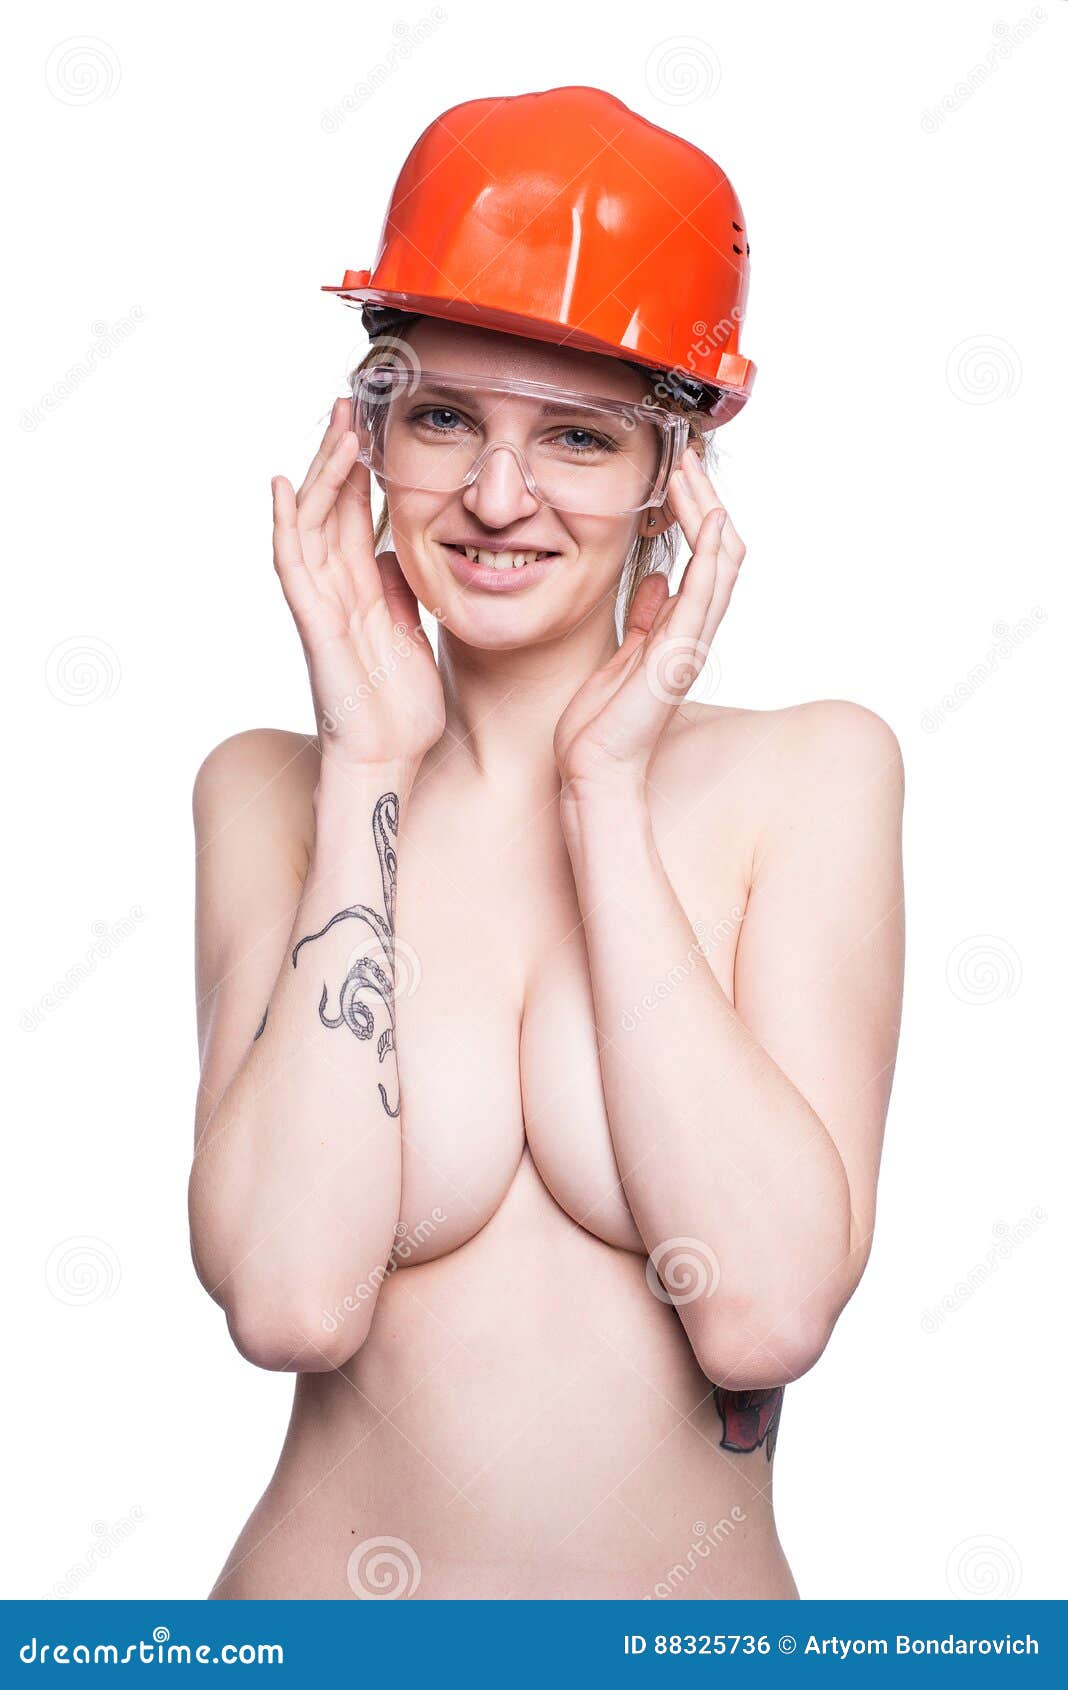 Nude female construction workers